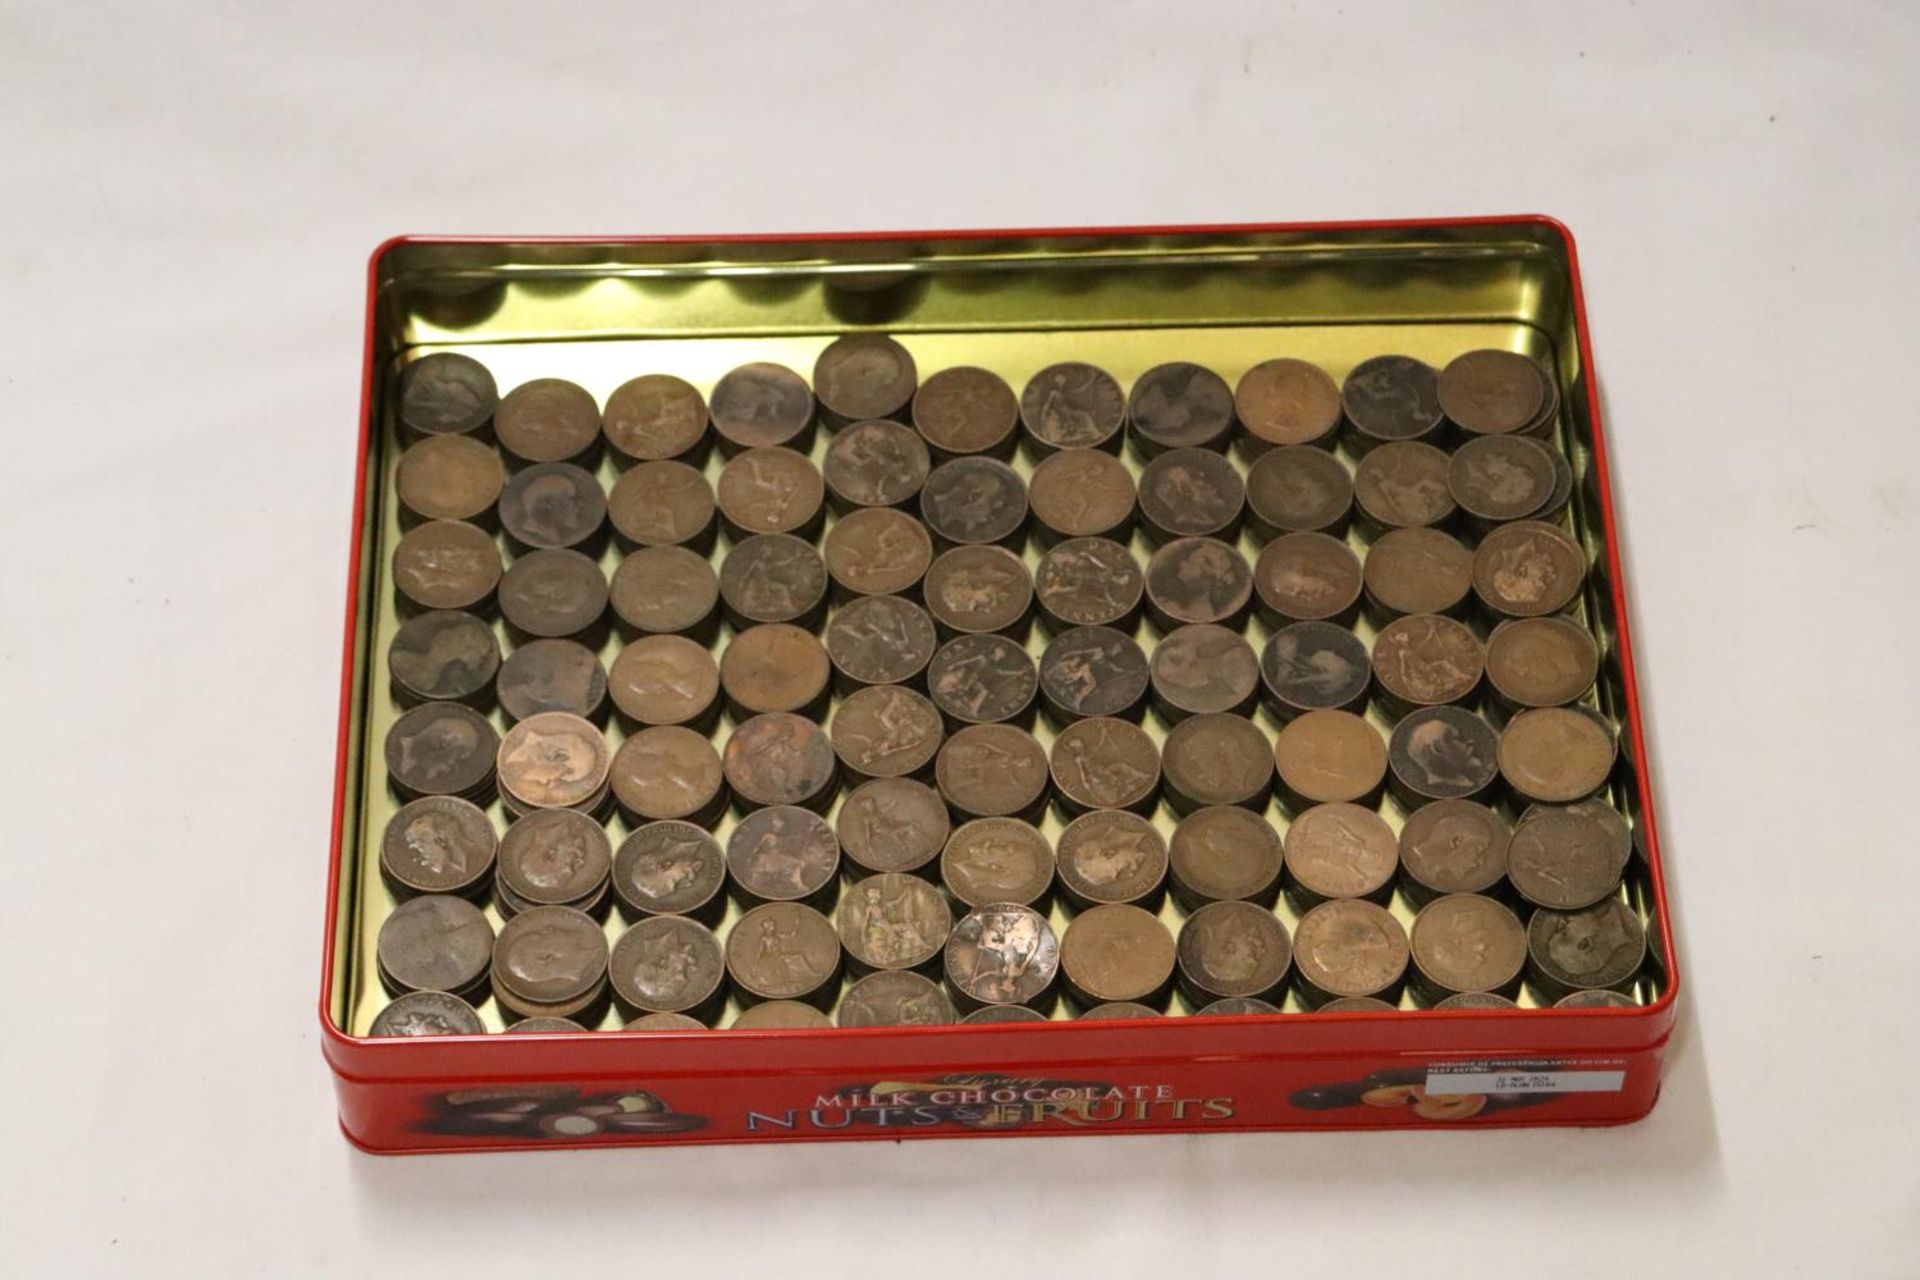 APPROXIMATELY 530 PRE-DECIMAL BRITISH ONE PENNY COINS DATING FROM 1861 TO THE 1960'S